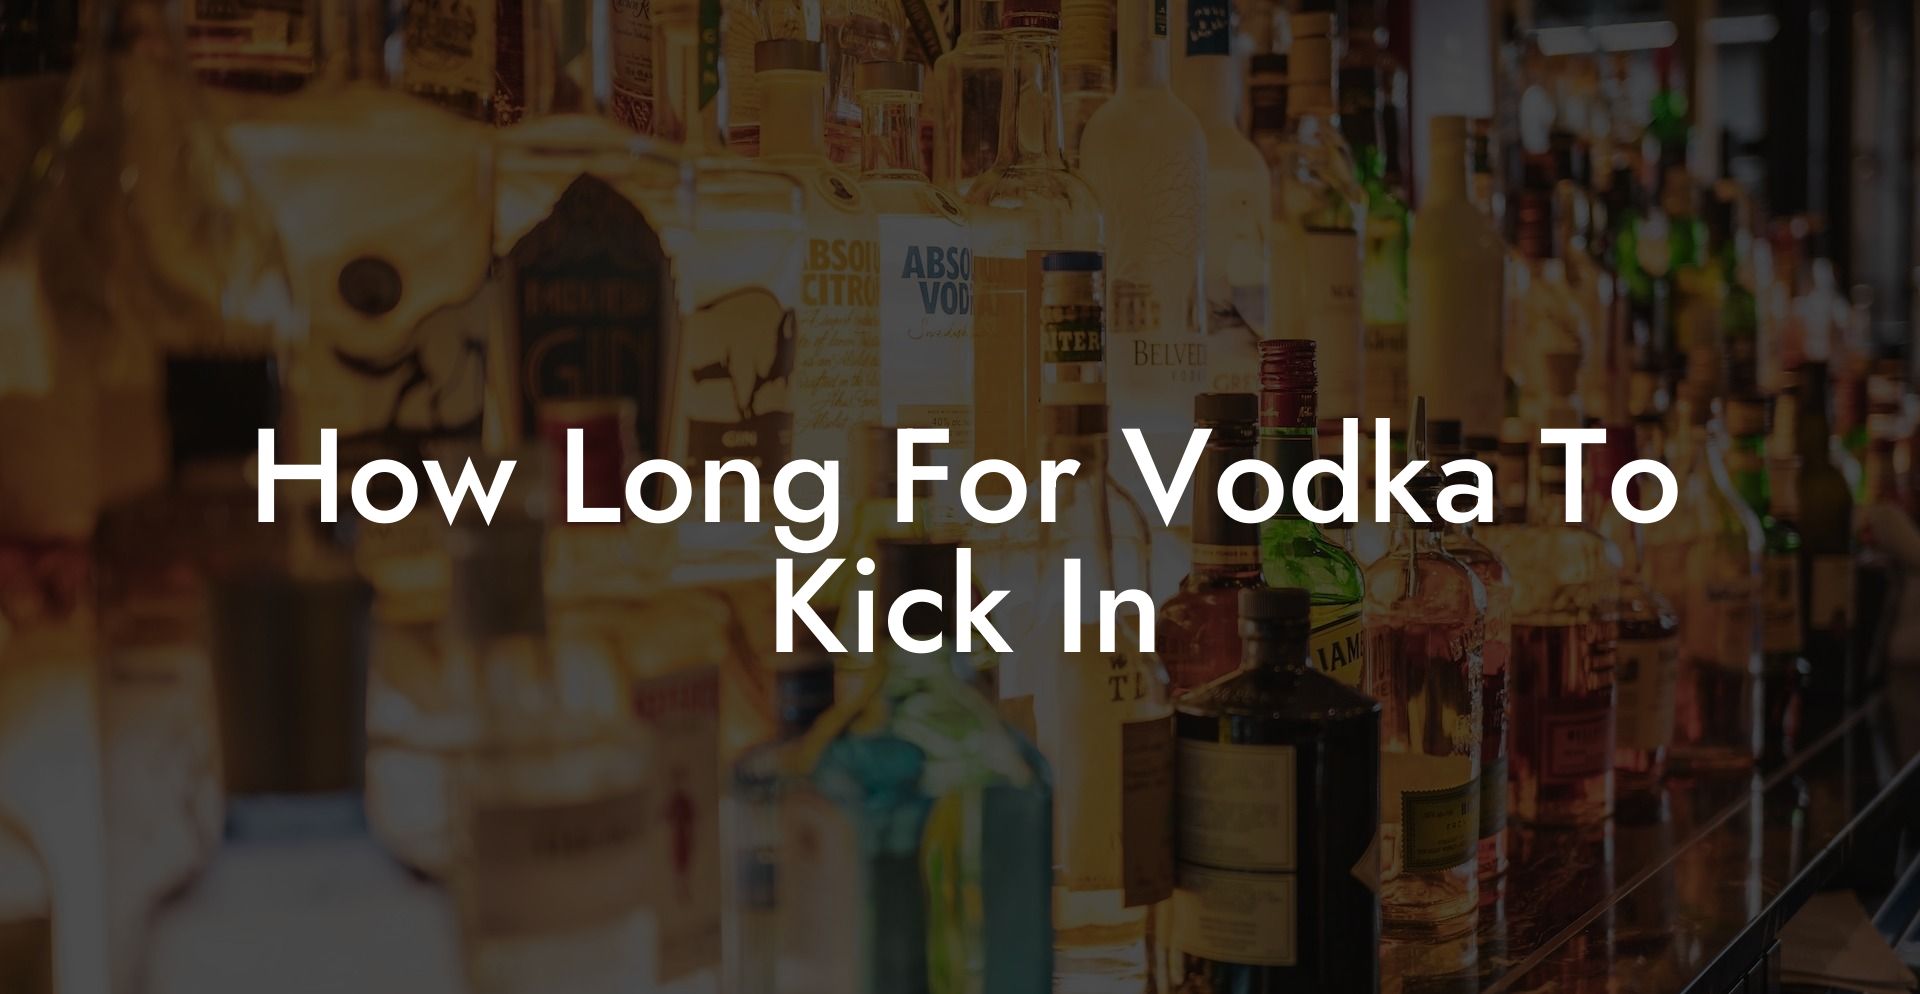 How Long For Vodka To Kick In